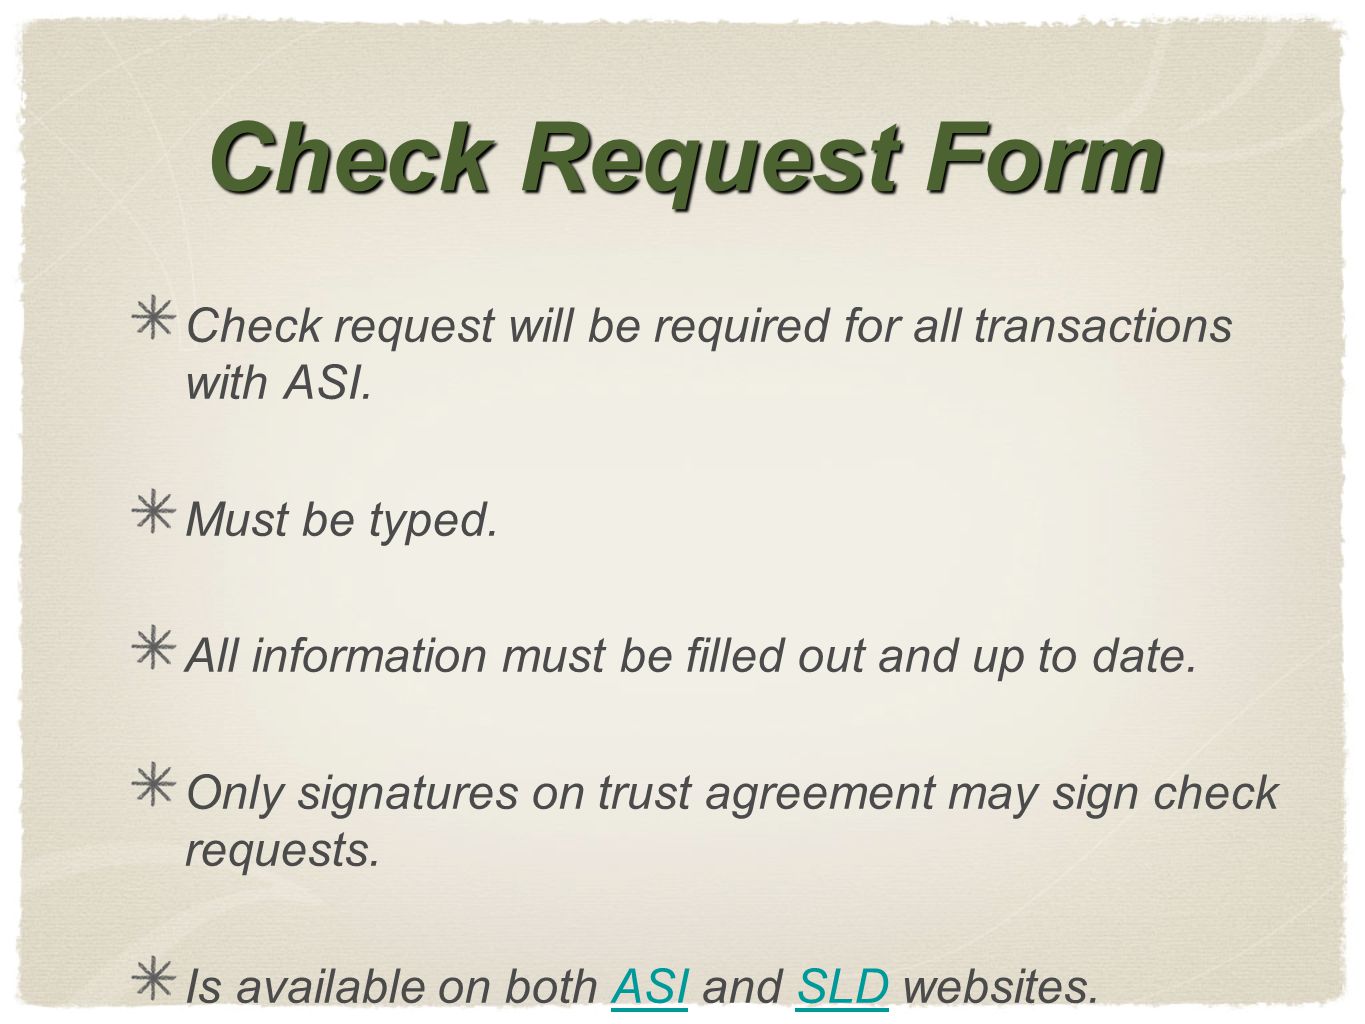 Check Request Form Check request will be required for all transactions with ASI.